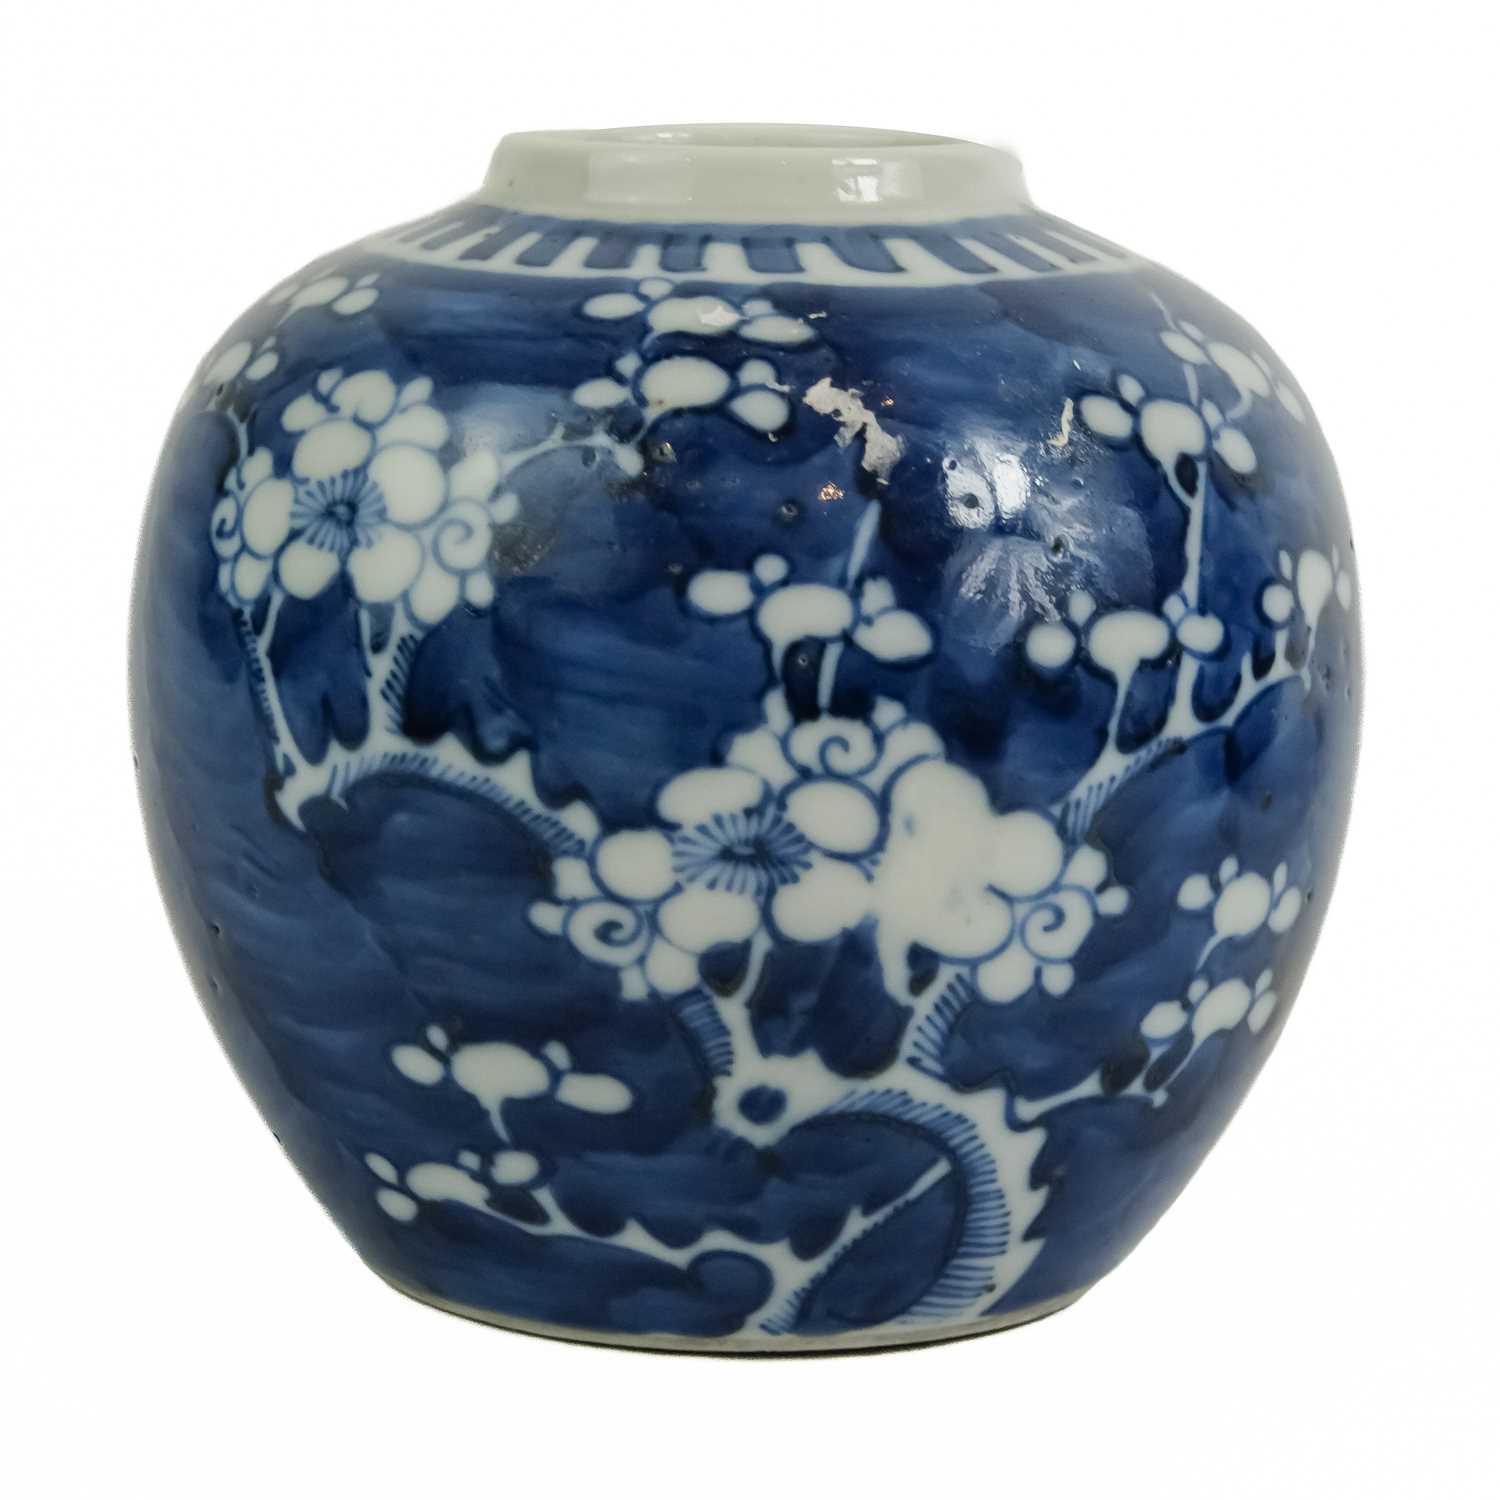 Two Chinese blue and white prunus blossom pattern ginger jars, late 19th century. - Image 2 of 10